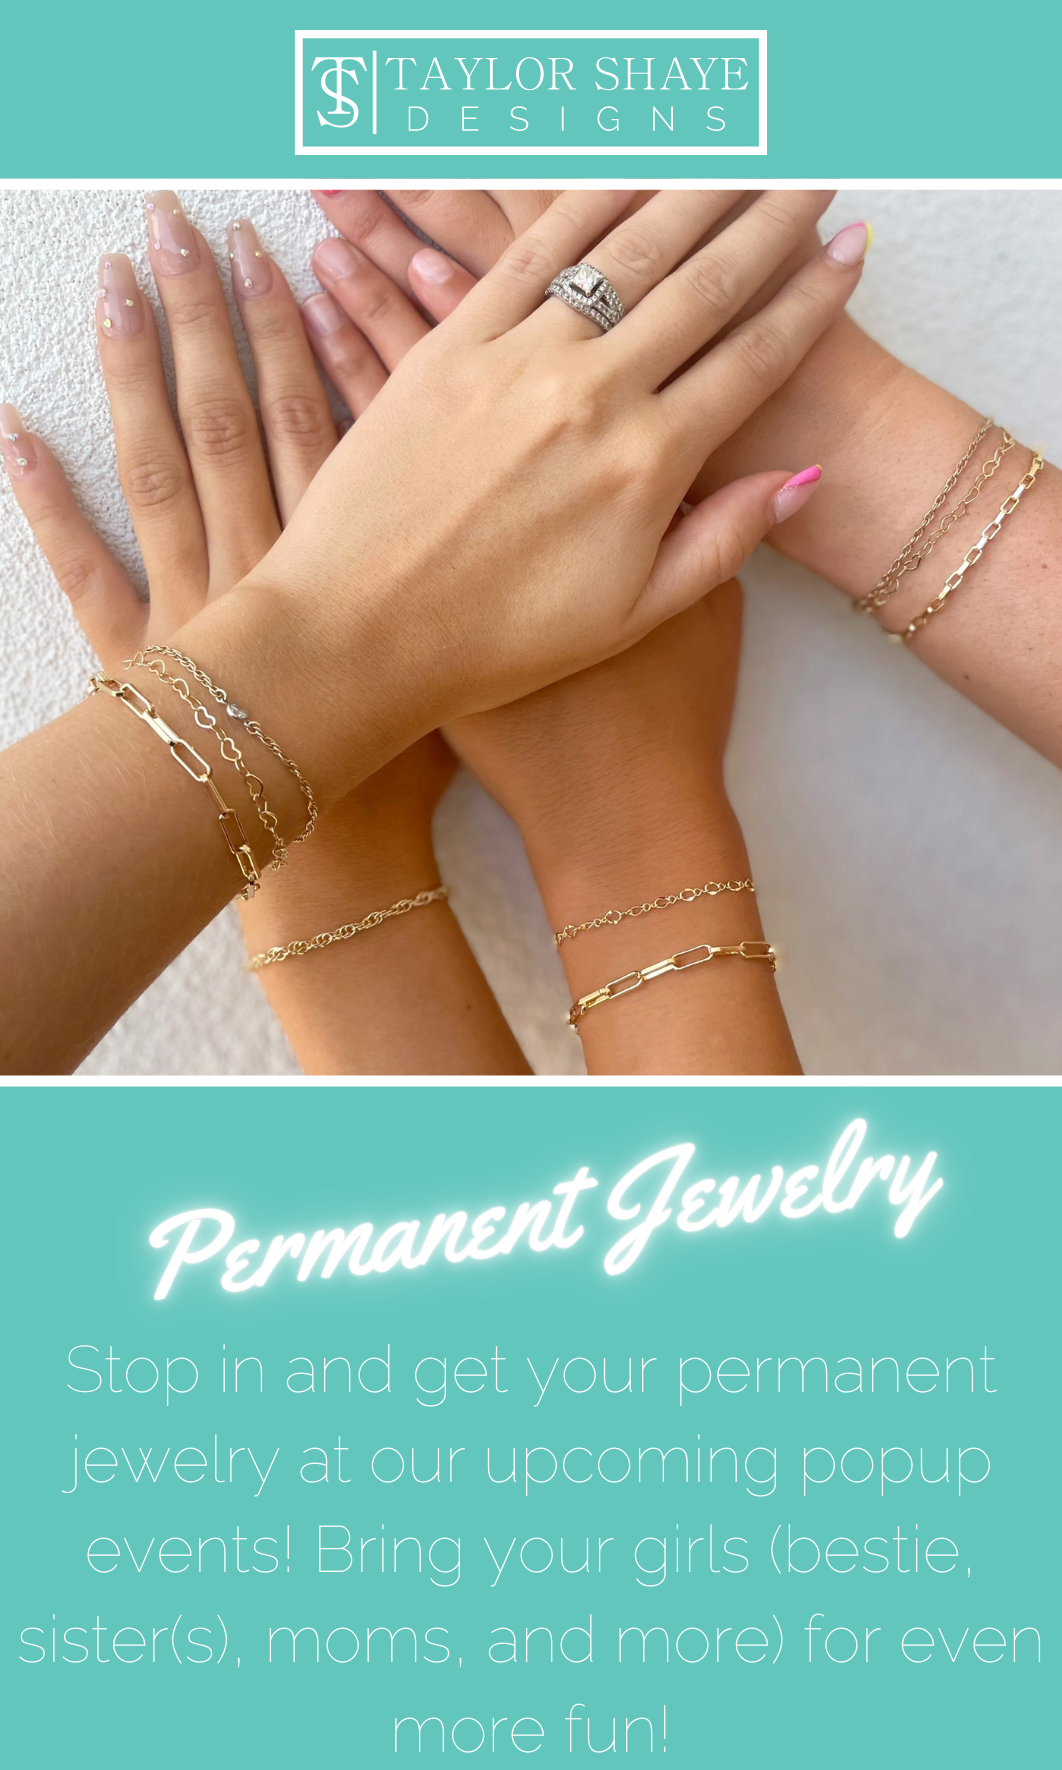 Permanent Jewelry Is Here to Stay - Rapaport